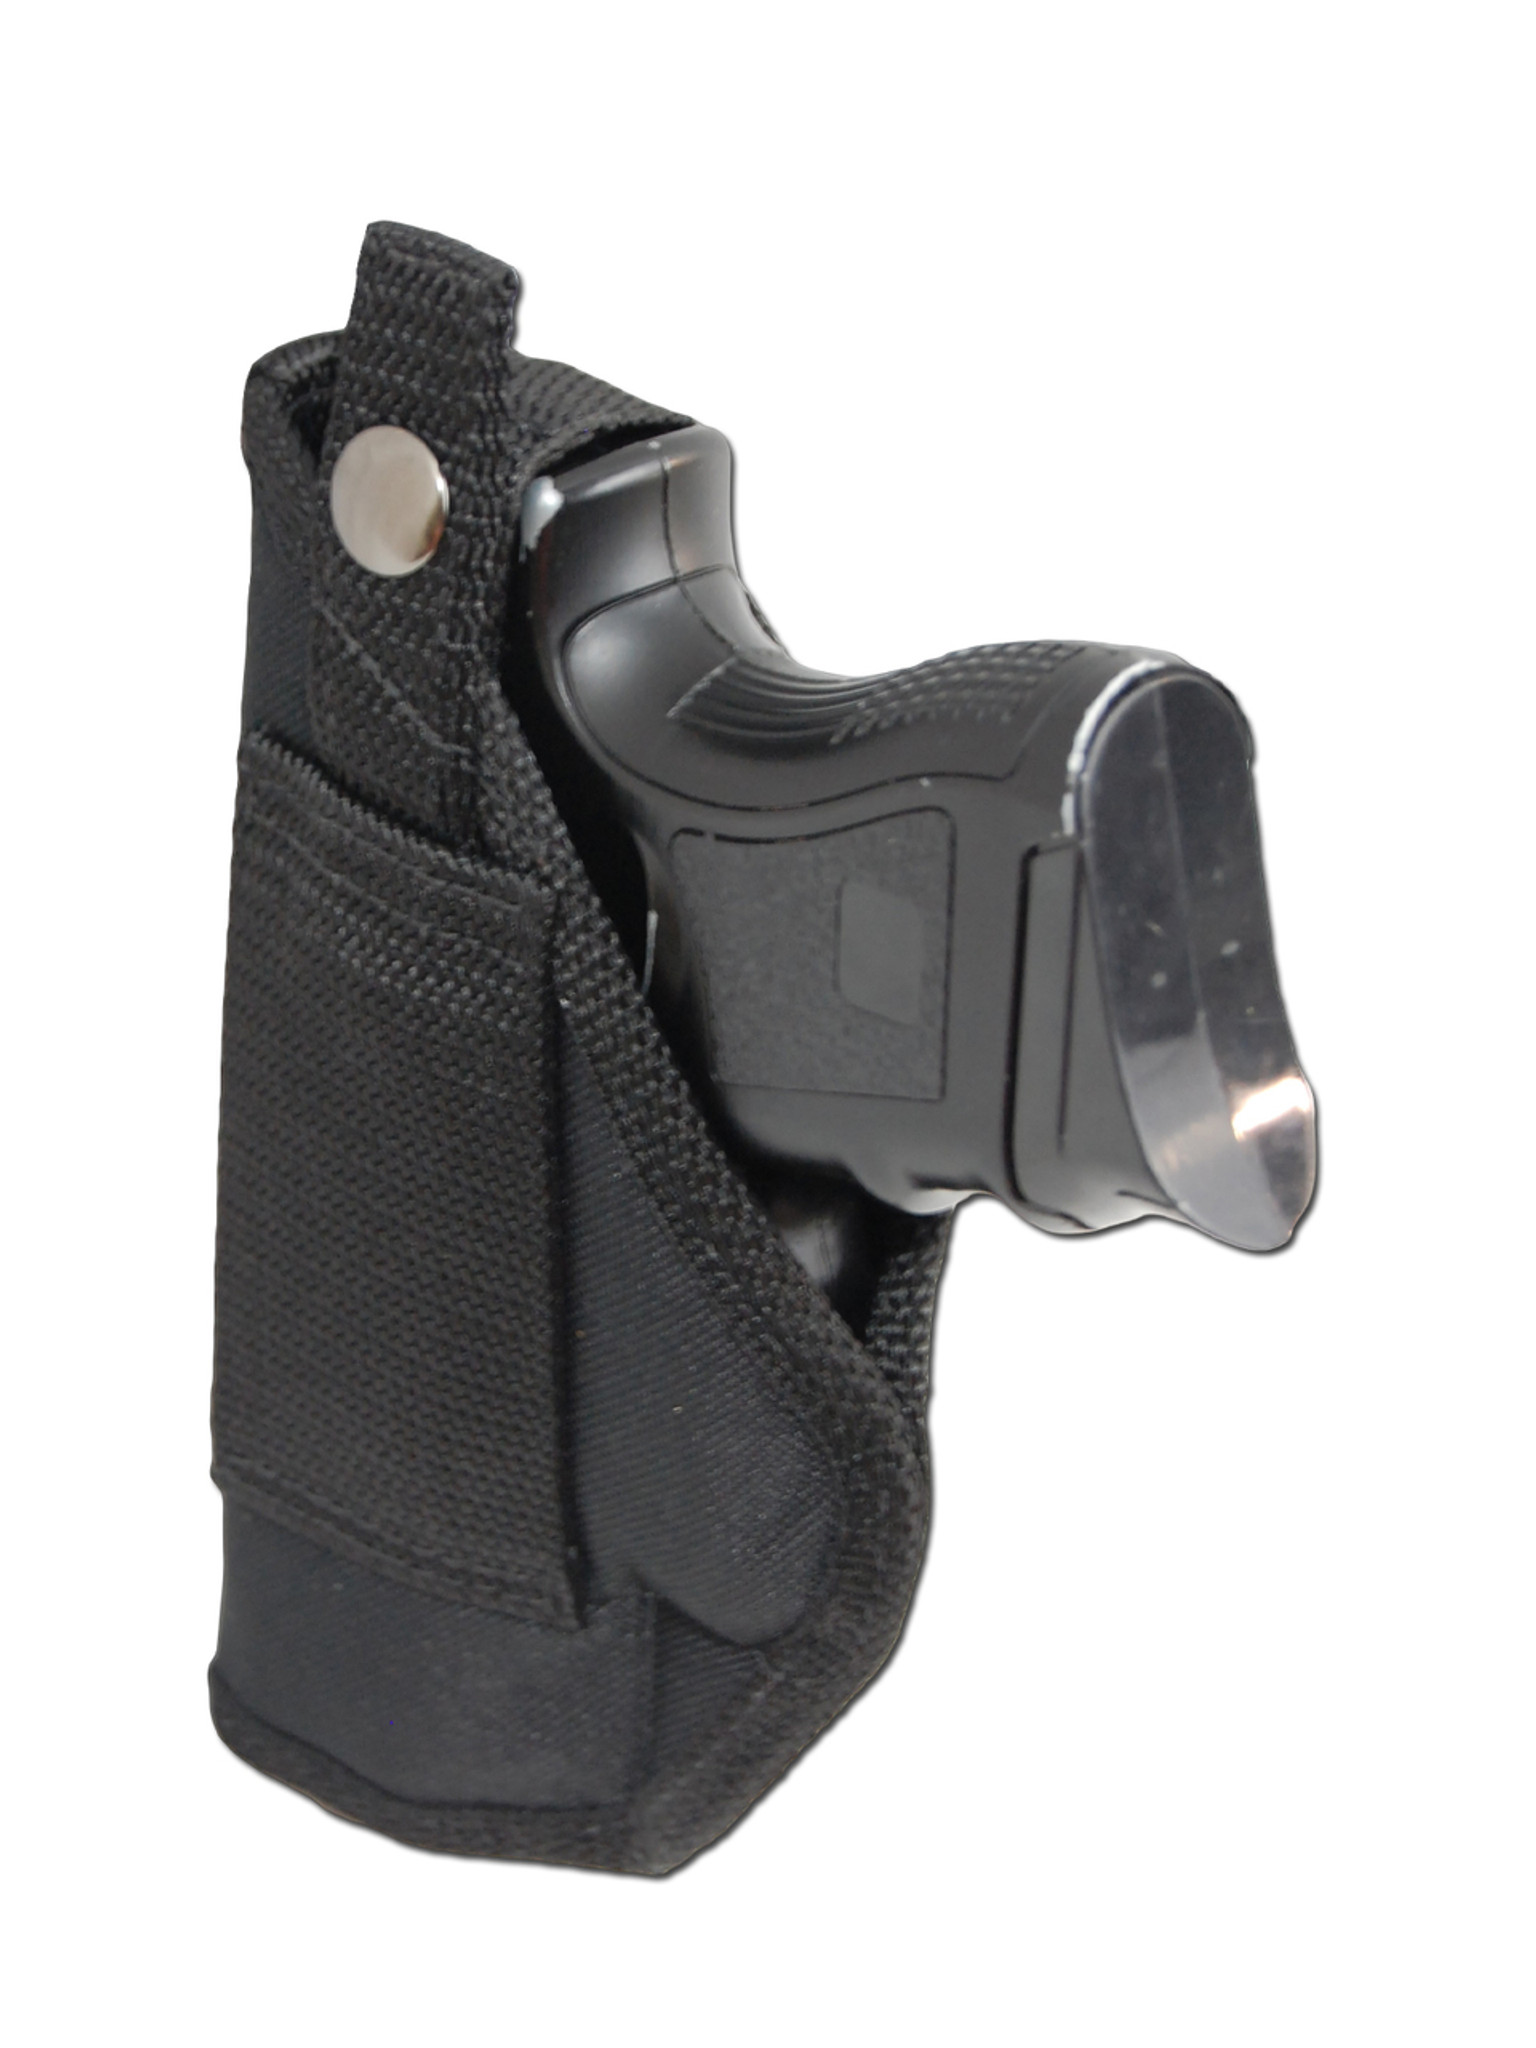 Barsony OWB Belt Clip Holster with Magazine Pouch for Kimber Micro 9mm  right - Buy with Prime